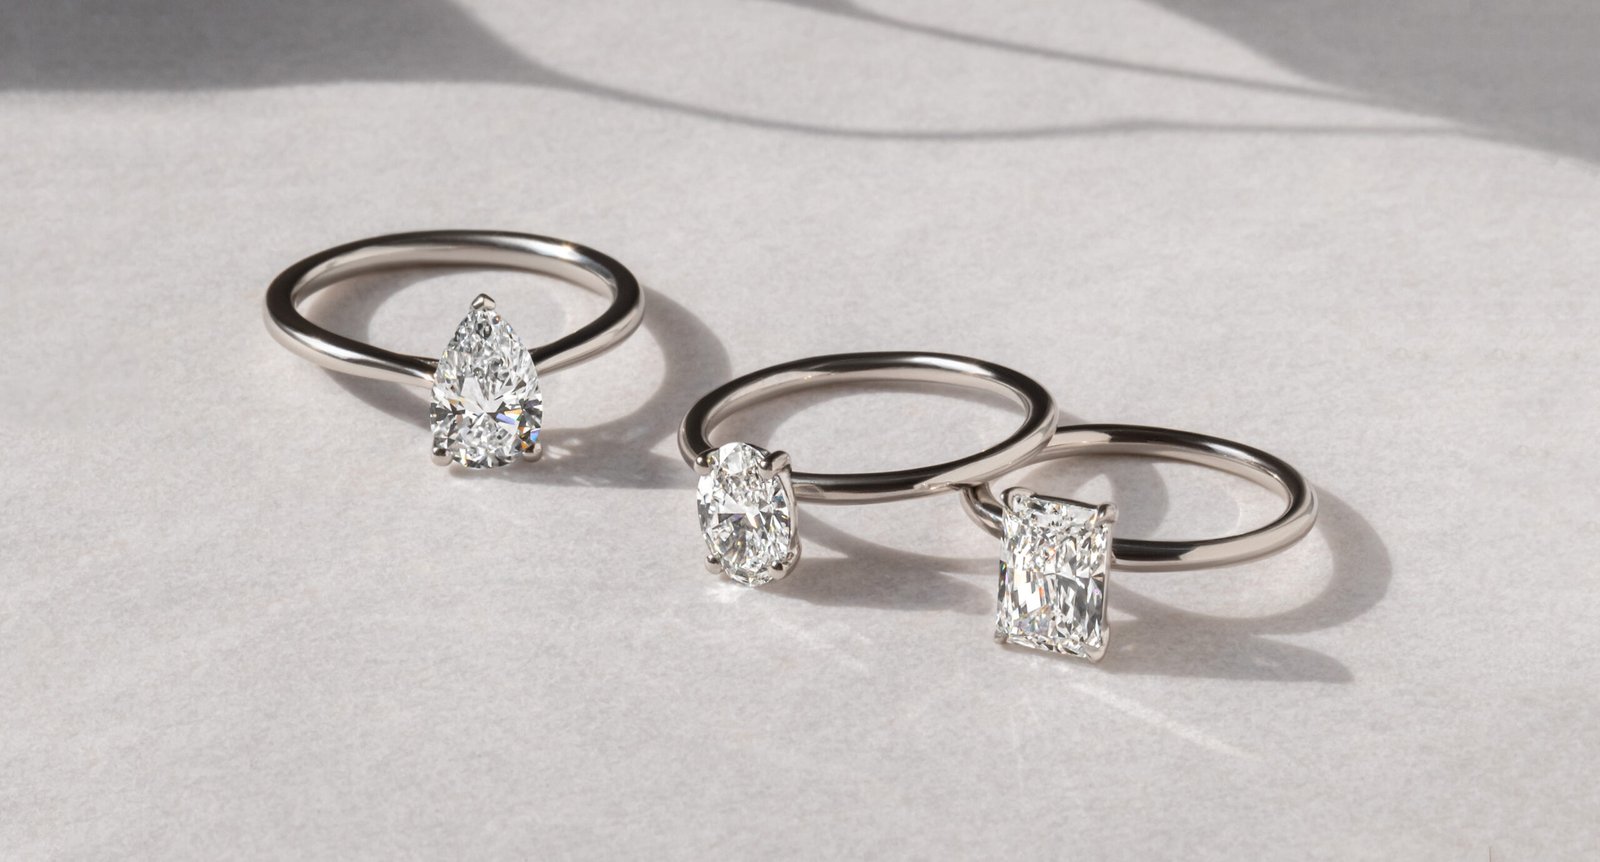 Bright and Conscientious: The Rise of Lab Created Diamond Rings within the UK